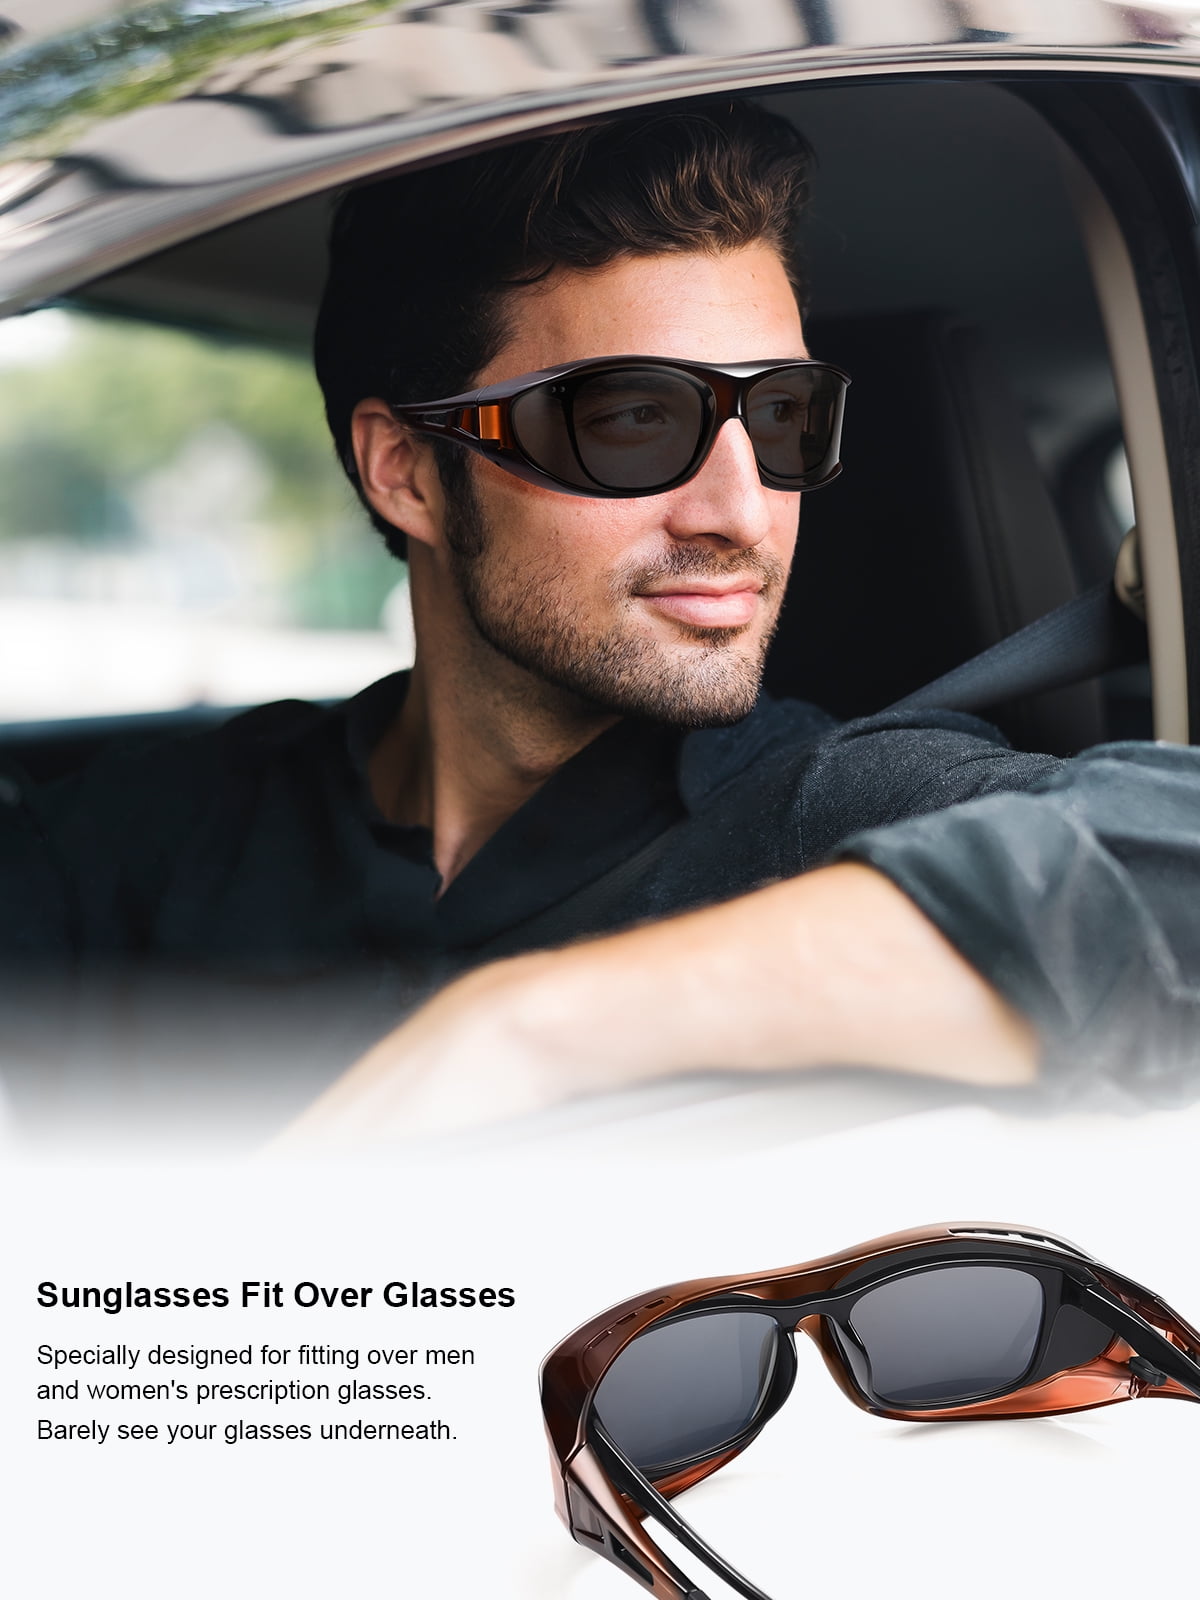 8 Best Types of UV Sunglasses for Eye Protection: Buyer's Guide